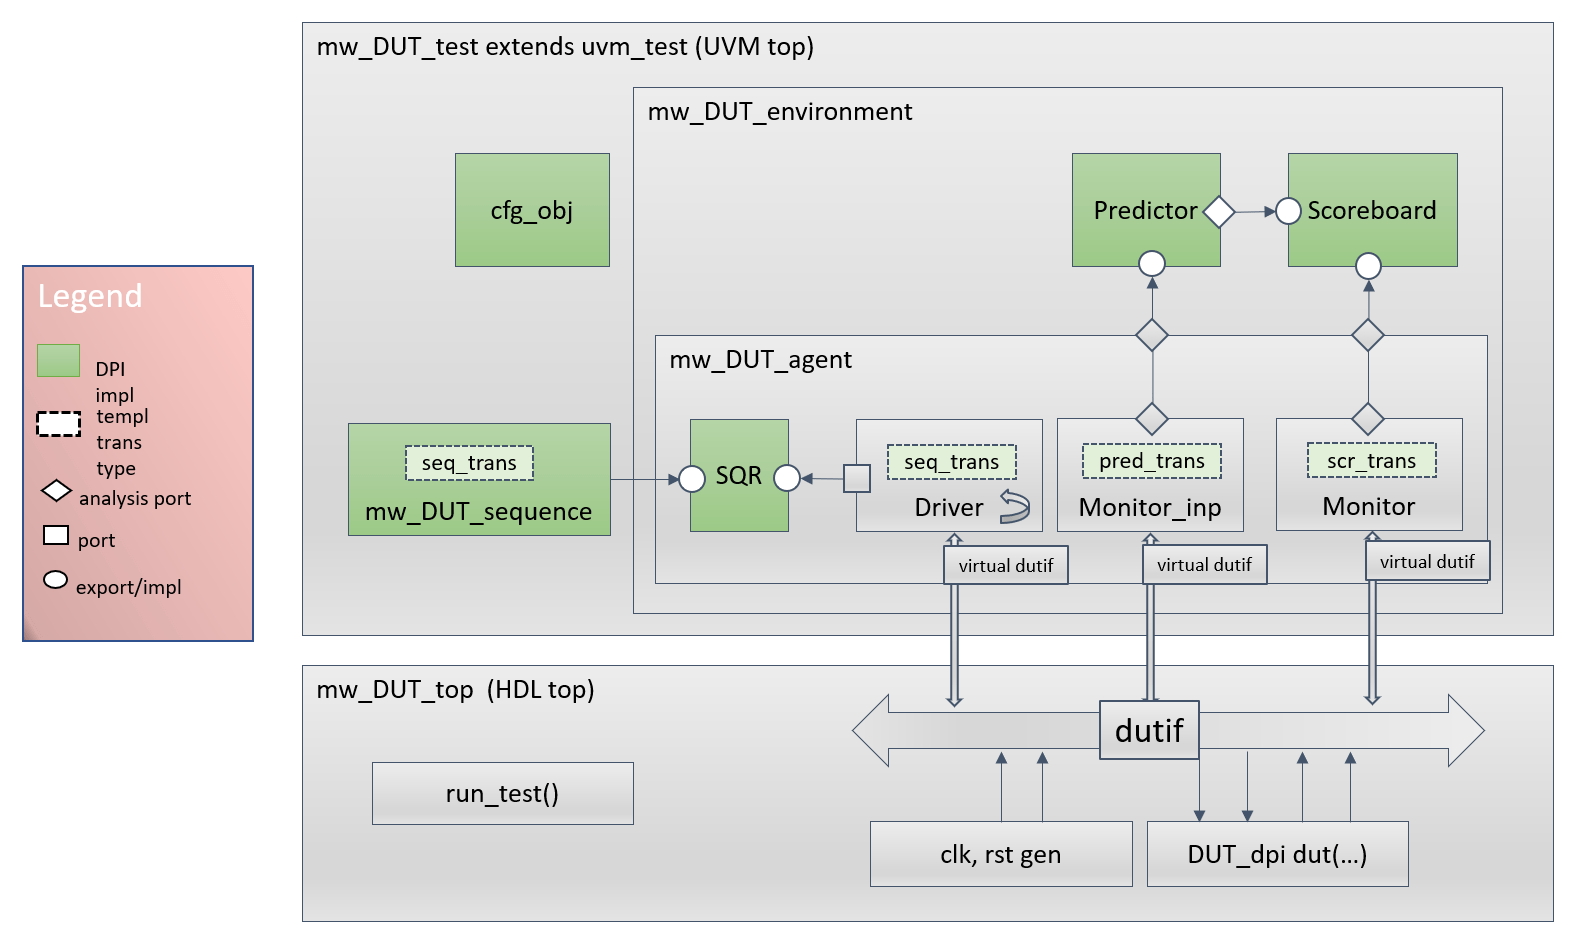 UVM test bench structure with predictor, sequence, scoreboard, scoreboard configuration object, sequence transaction, predictor transaction, and scoreboard transaction highlighted in green.